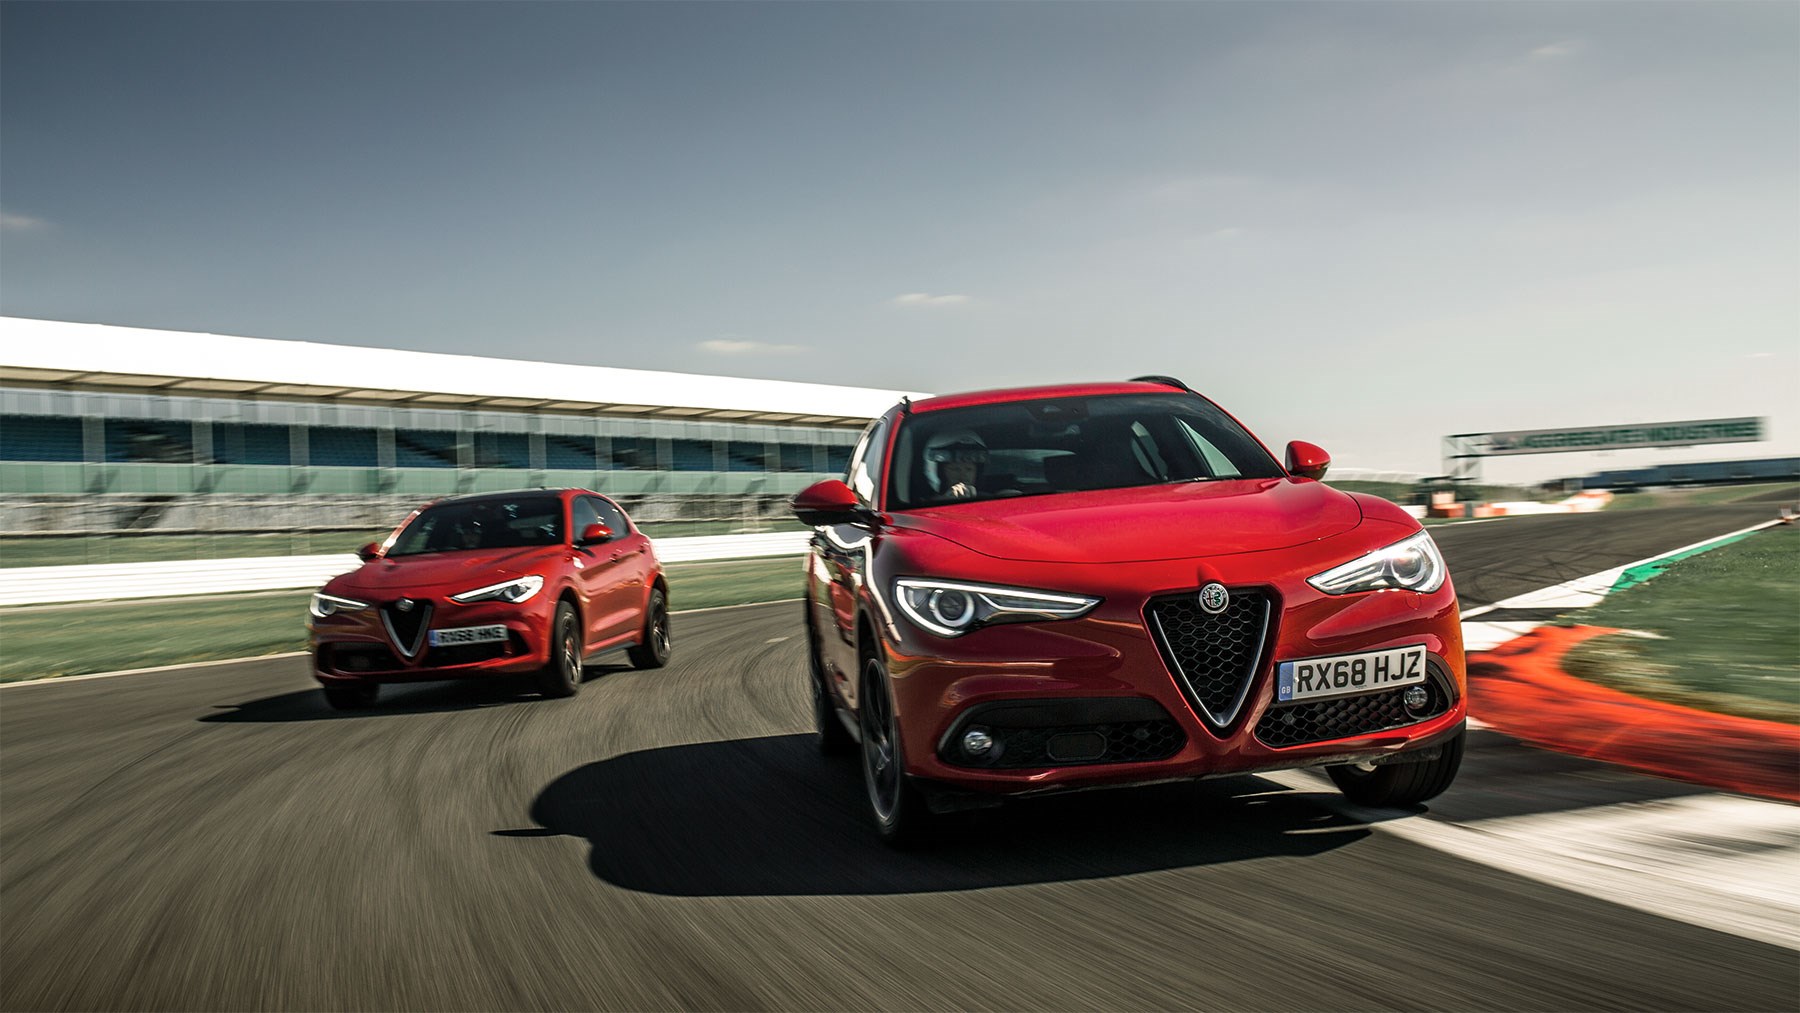 We set an unofficial diesel lap record of the Silverstone circuit in Northamptonshire in our Stelvio